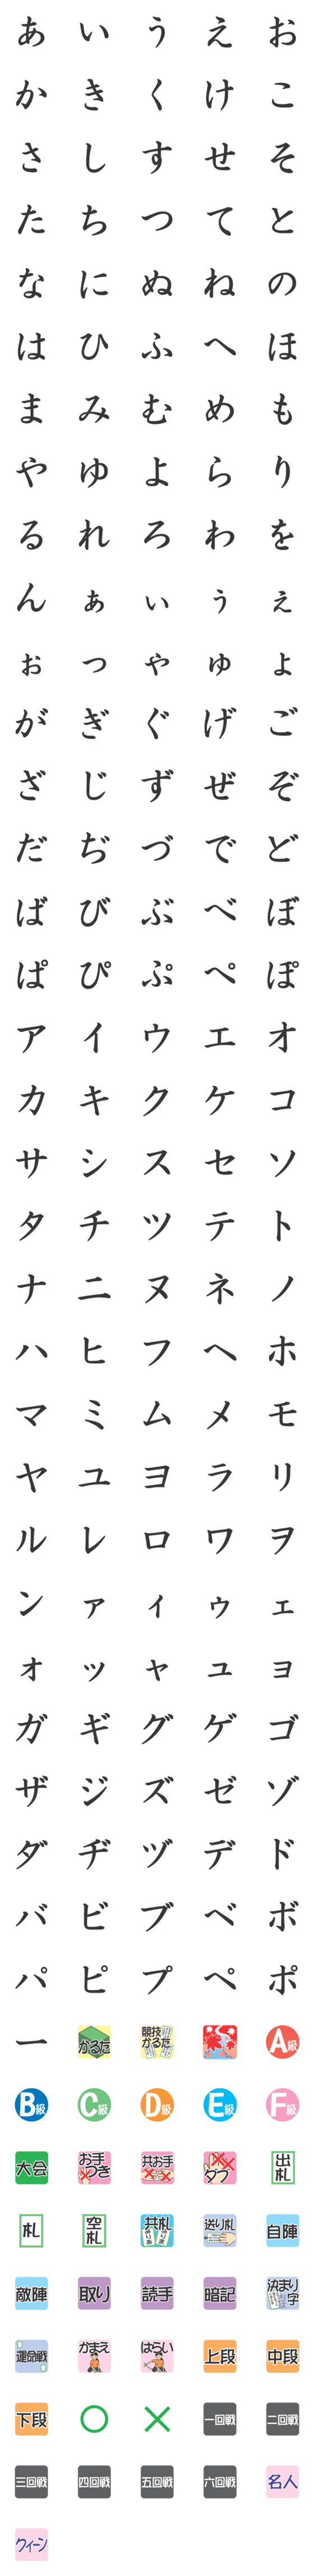 [LINE絵文字]競技かるた絵文字①の画像一覧